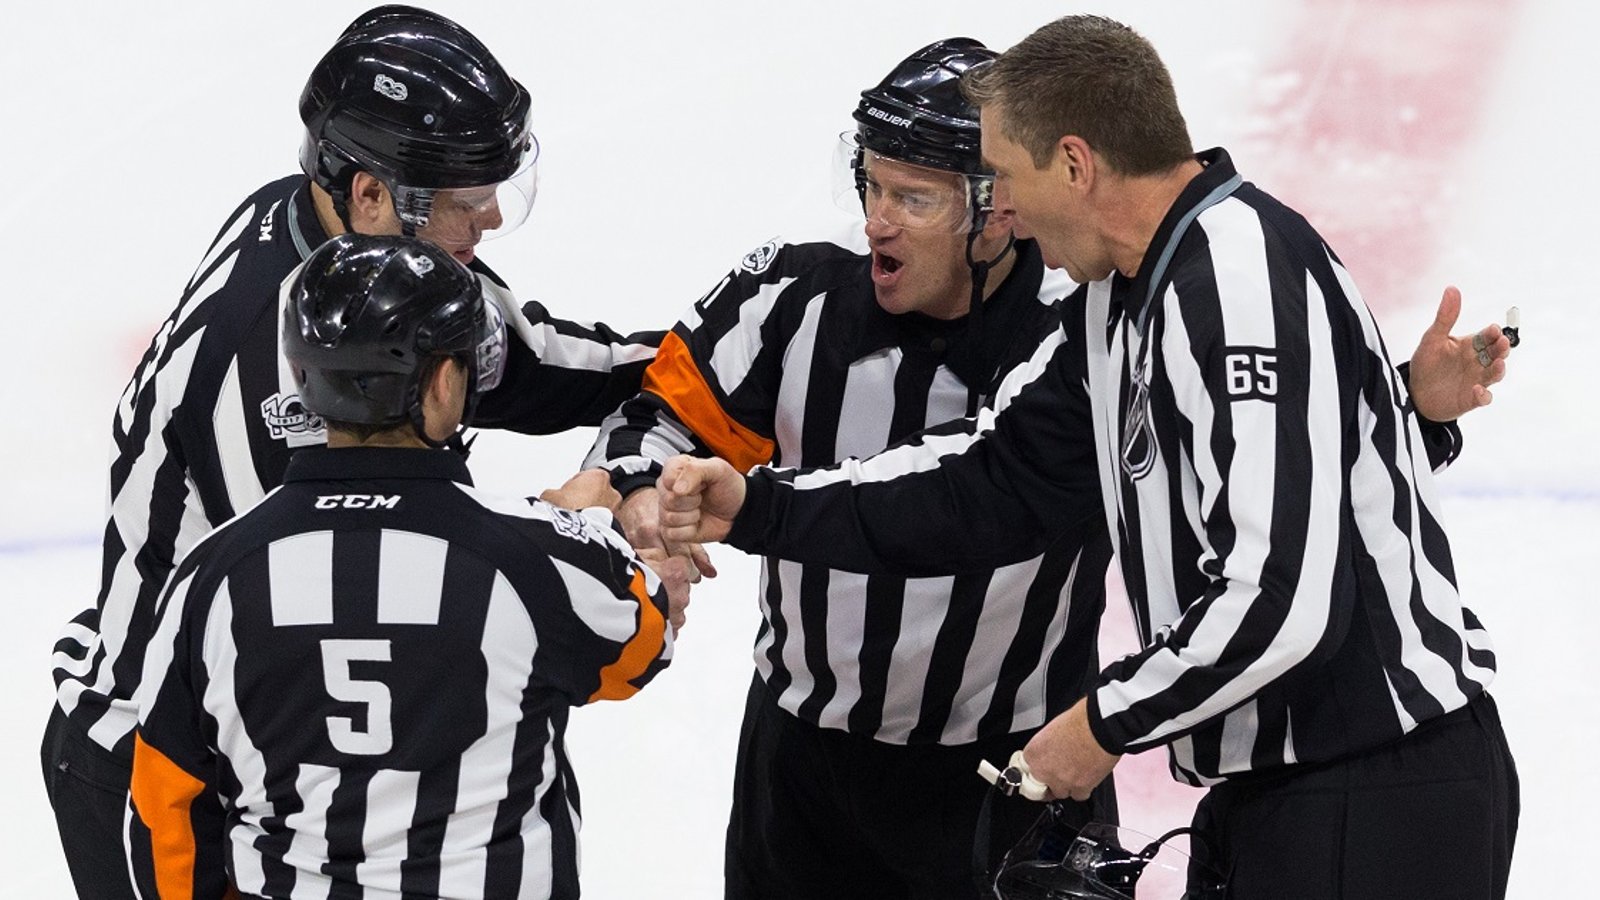 Breaking: NHL officially announces a new penalty for this upcoming season.